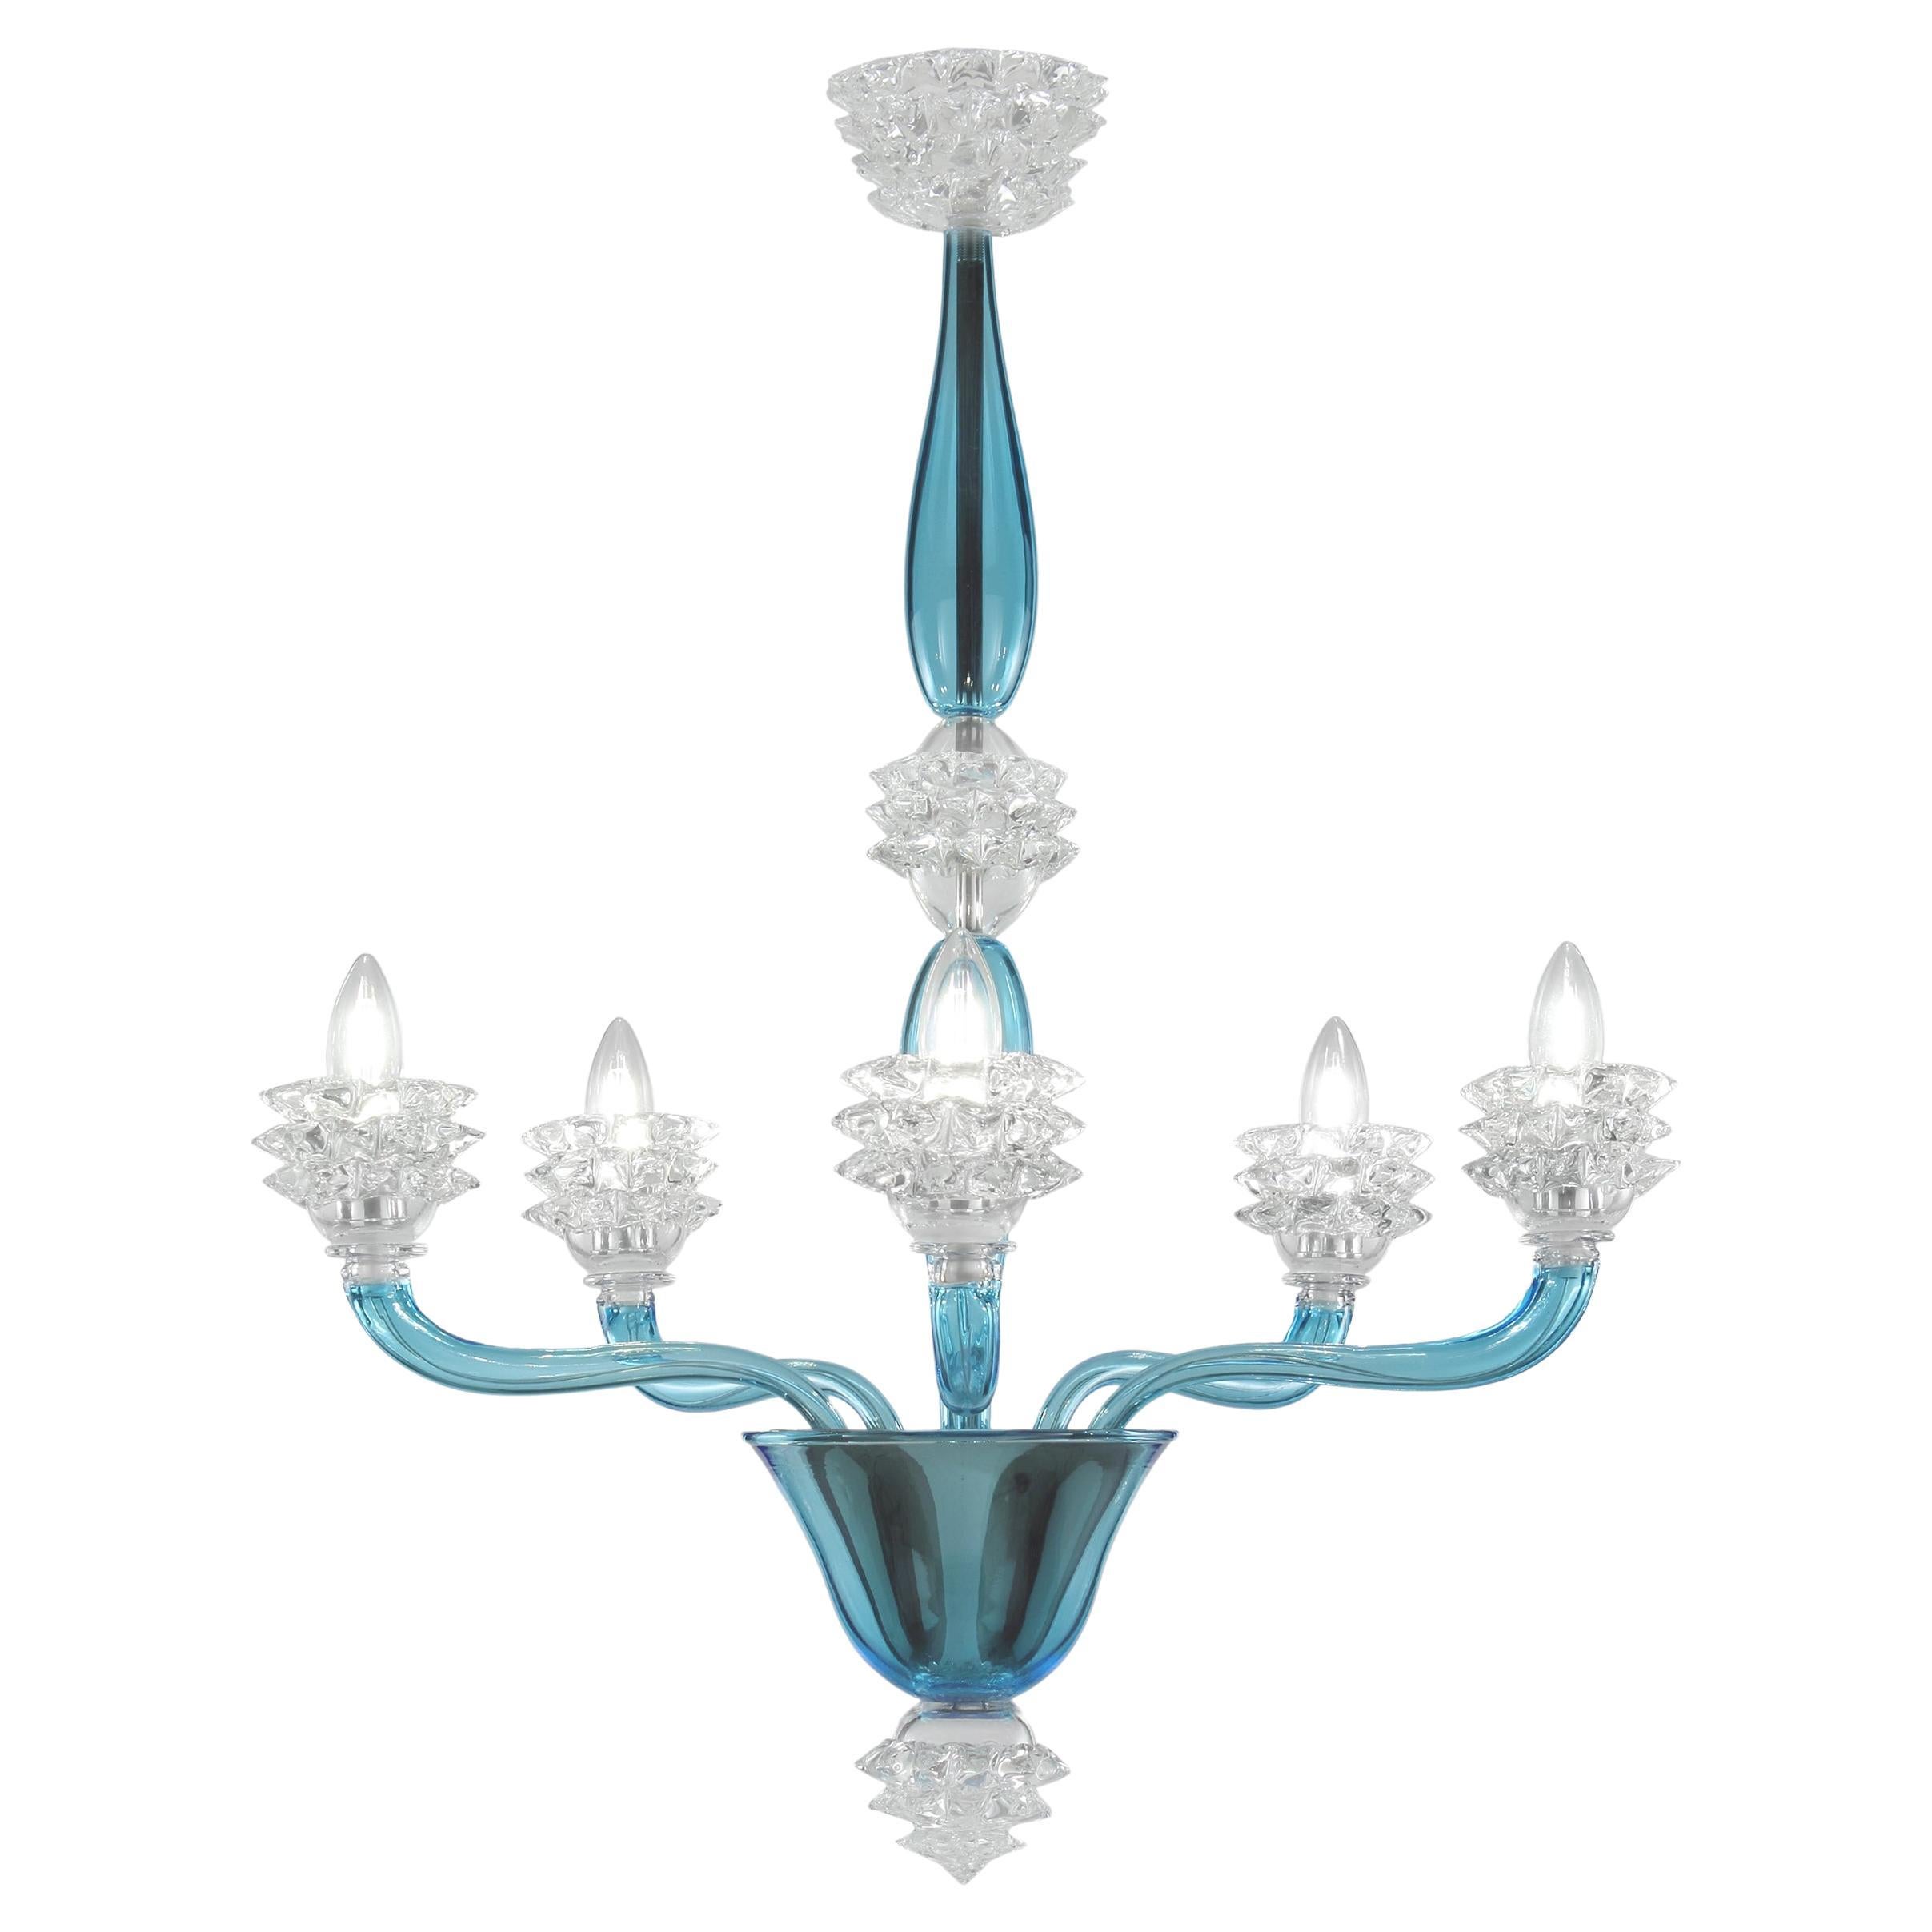 Italian Chandelier 5 arms Sky blue and clear Rostri Murano Glass by Multiforme